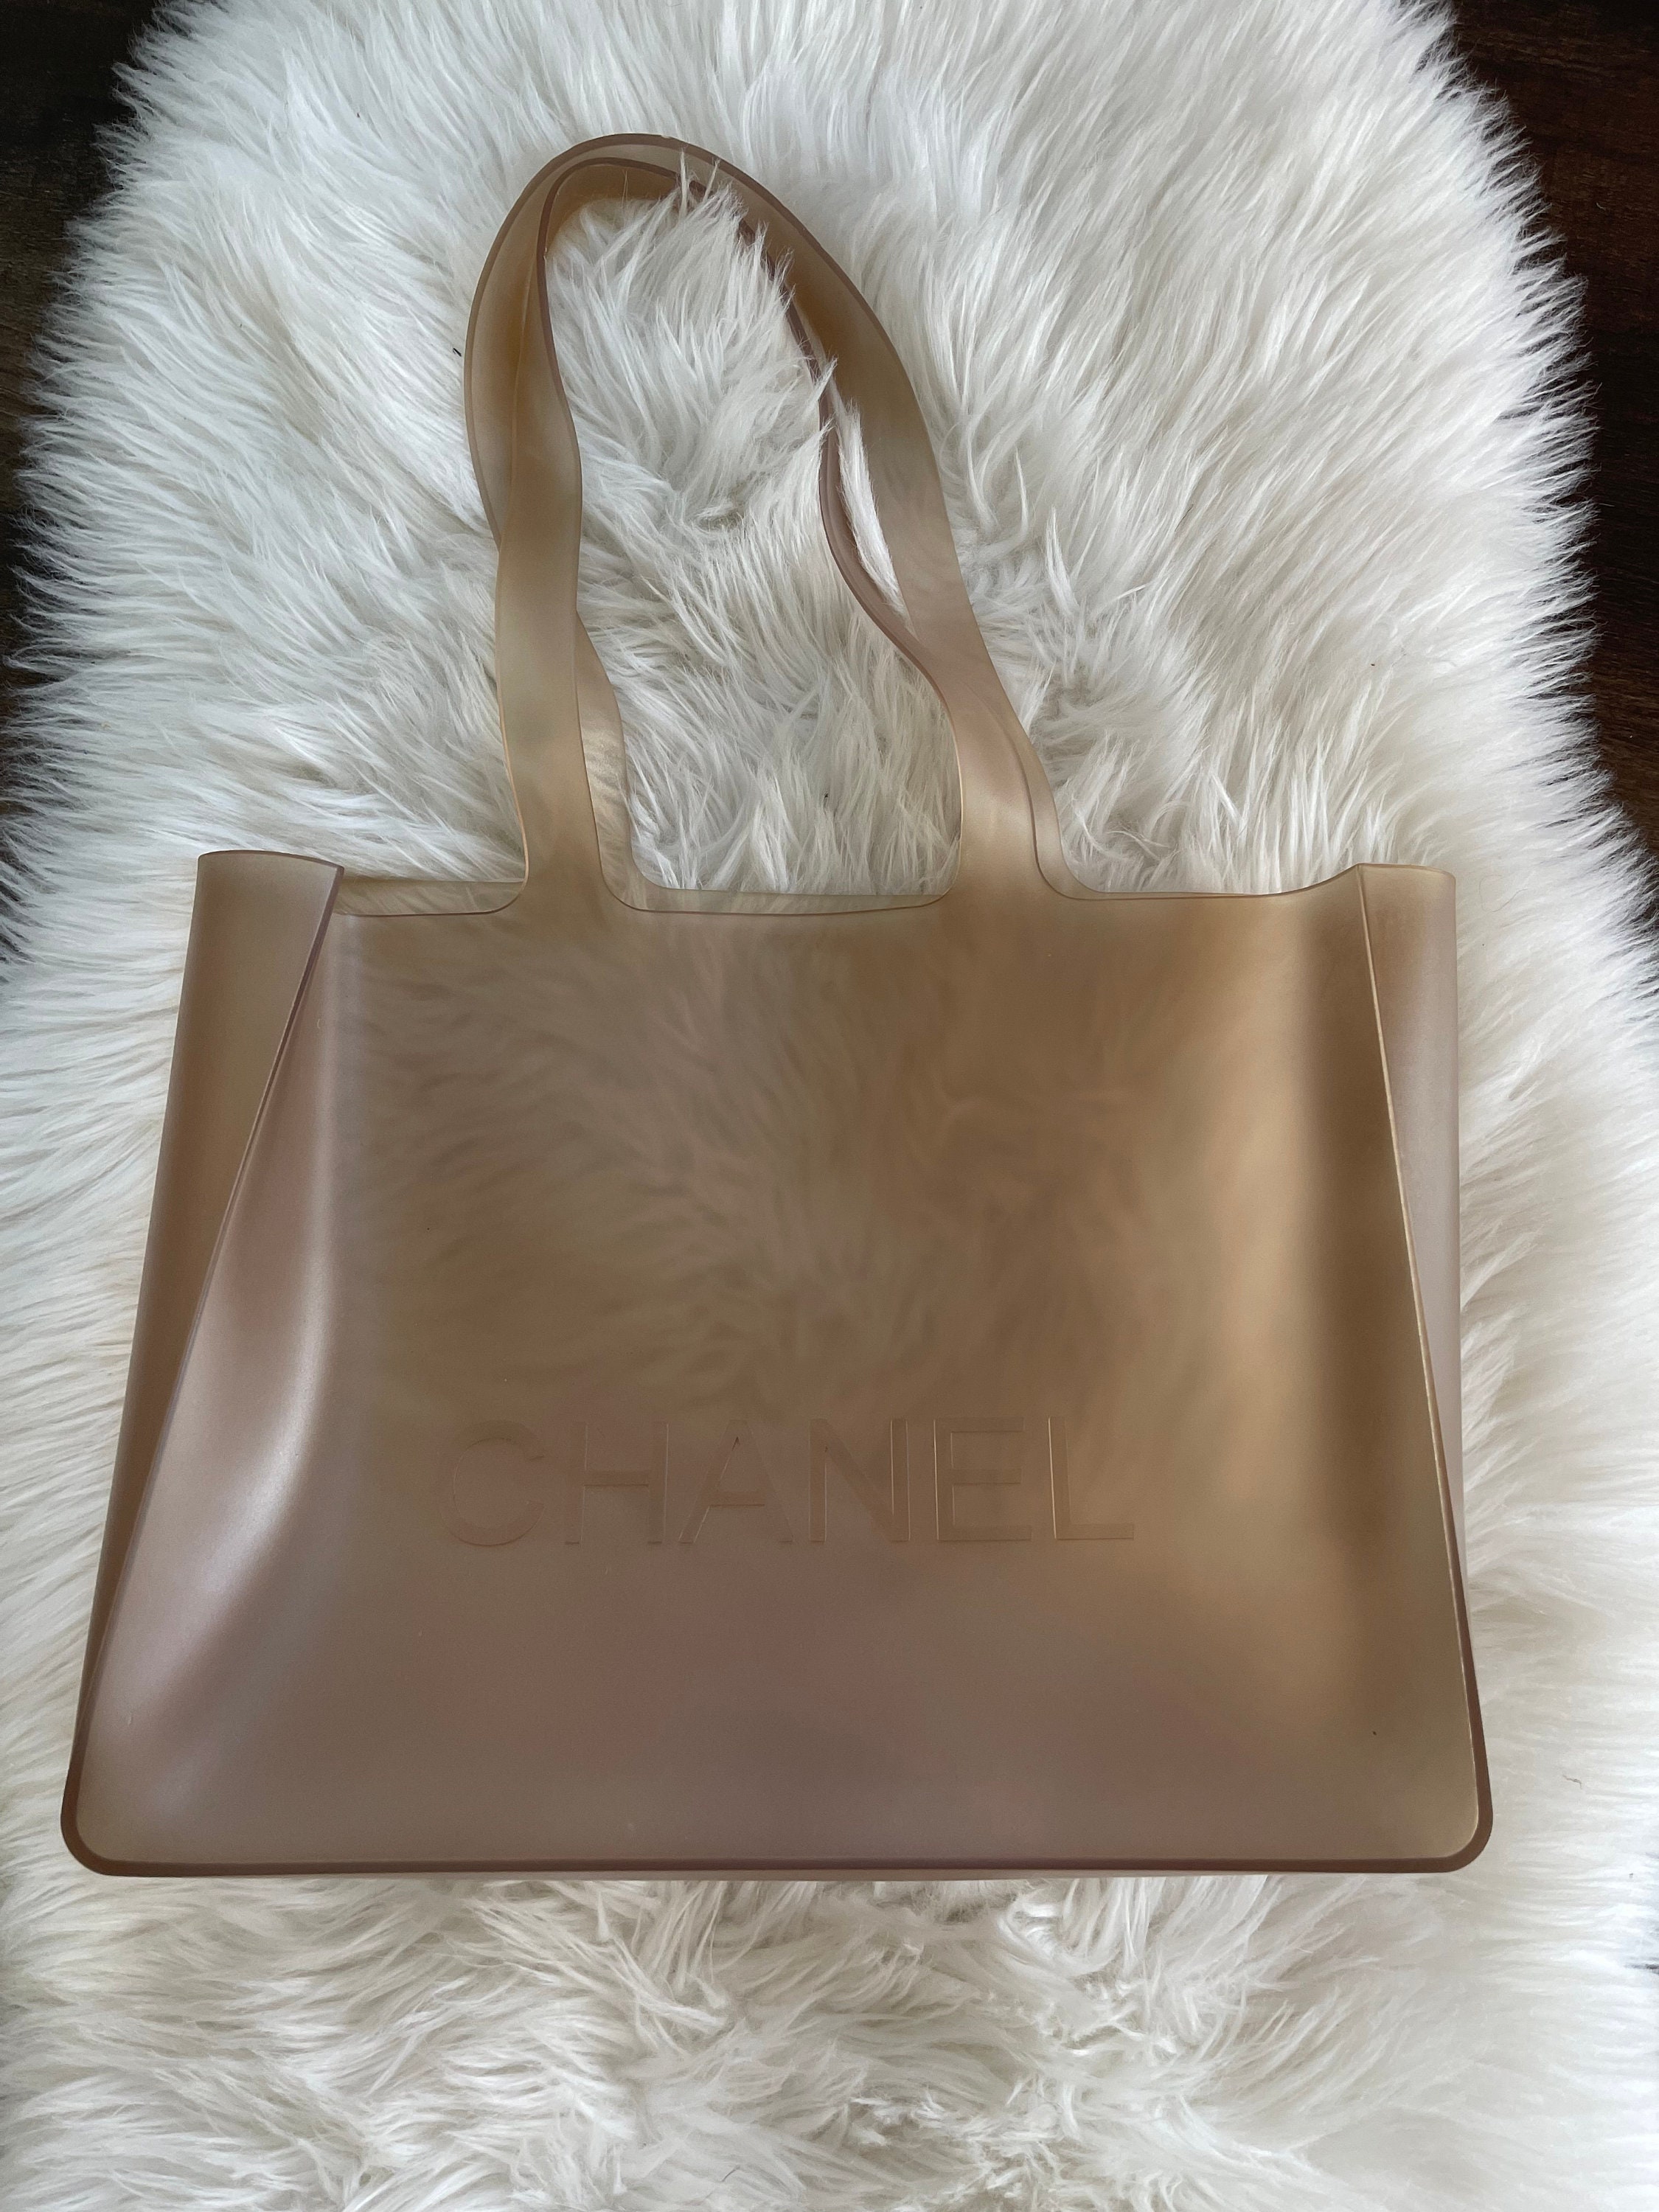 Vintage CHANEL Jumbo Pale Clear Gray Grey Rubber Gummy Jelly 